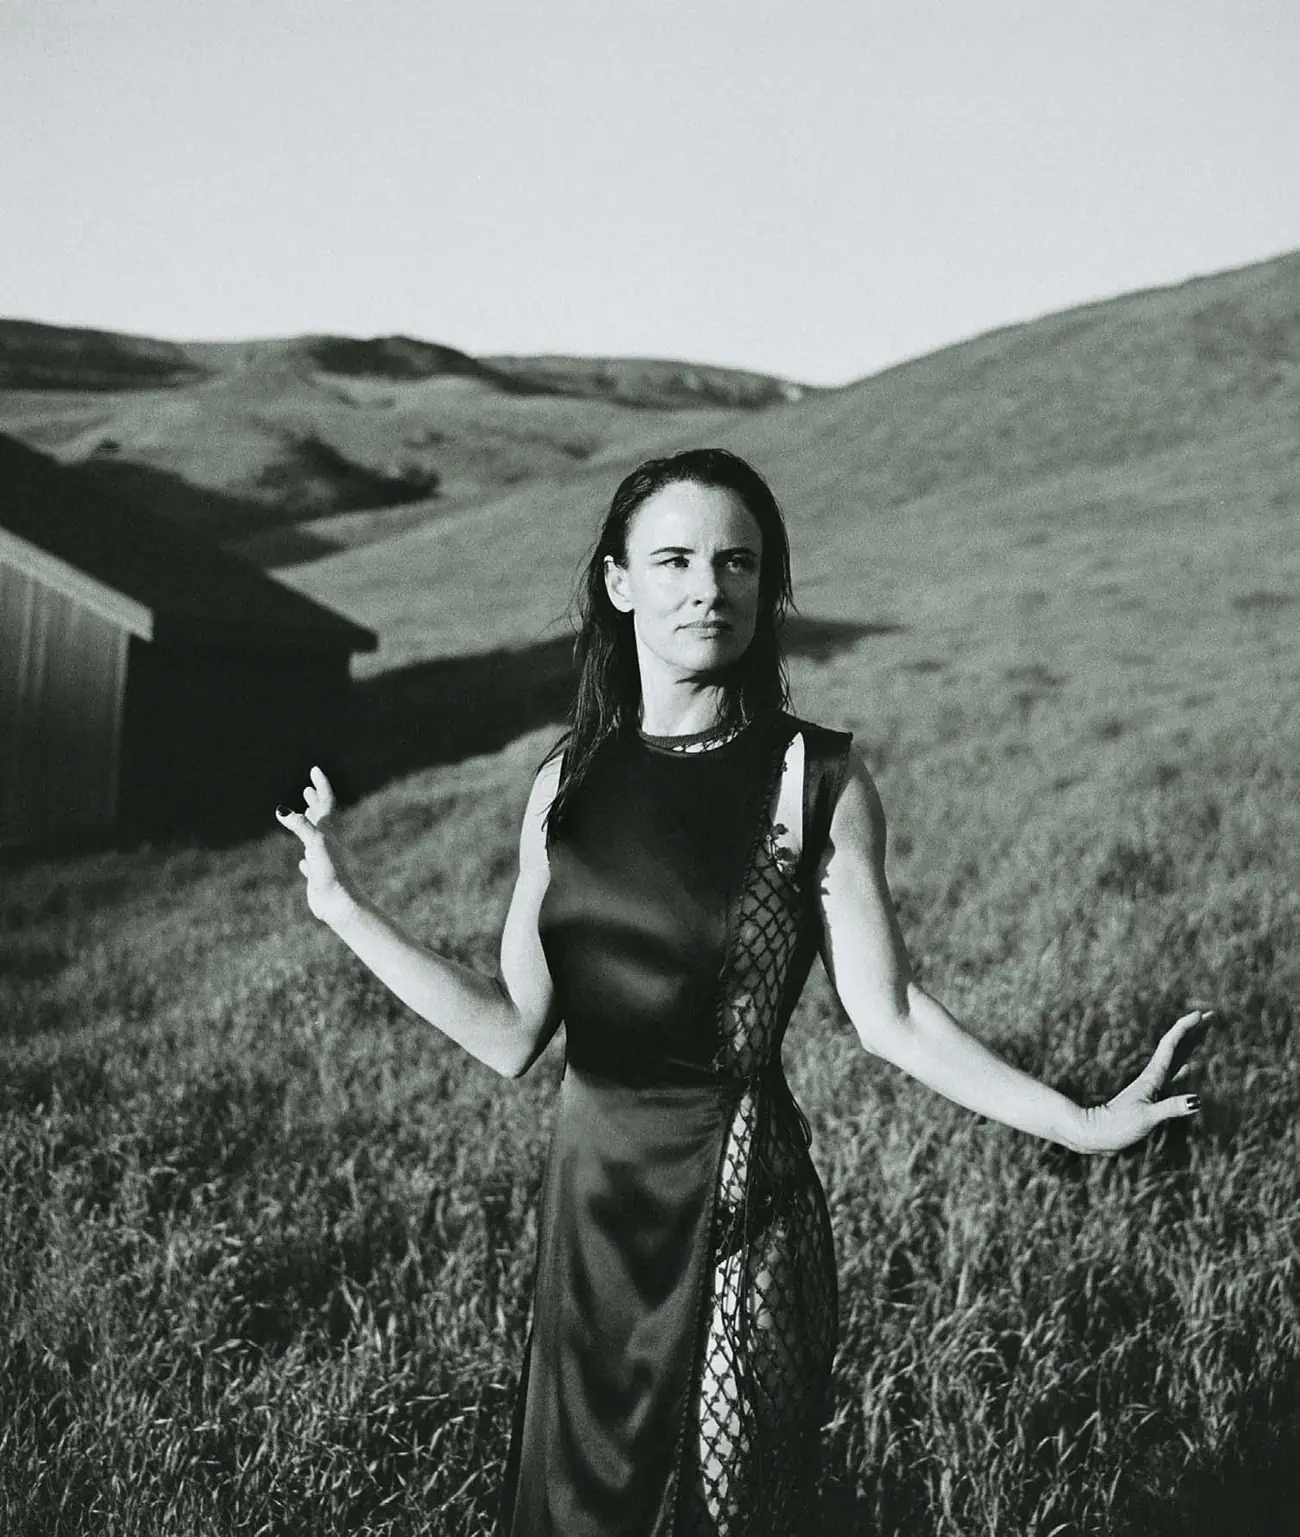 Juliette Lewis covers The Sunday Times Style April 2nd, 2023 by Olivia Malone